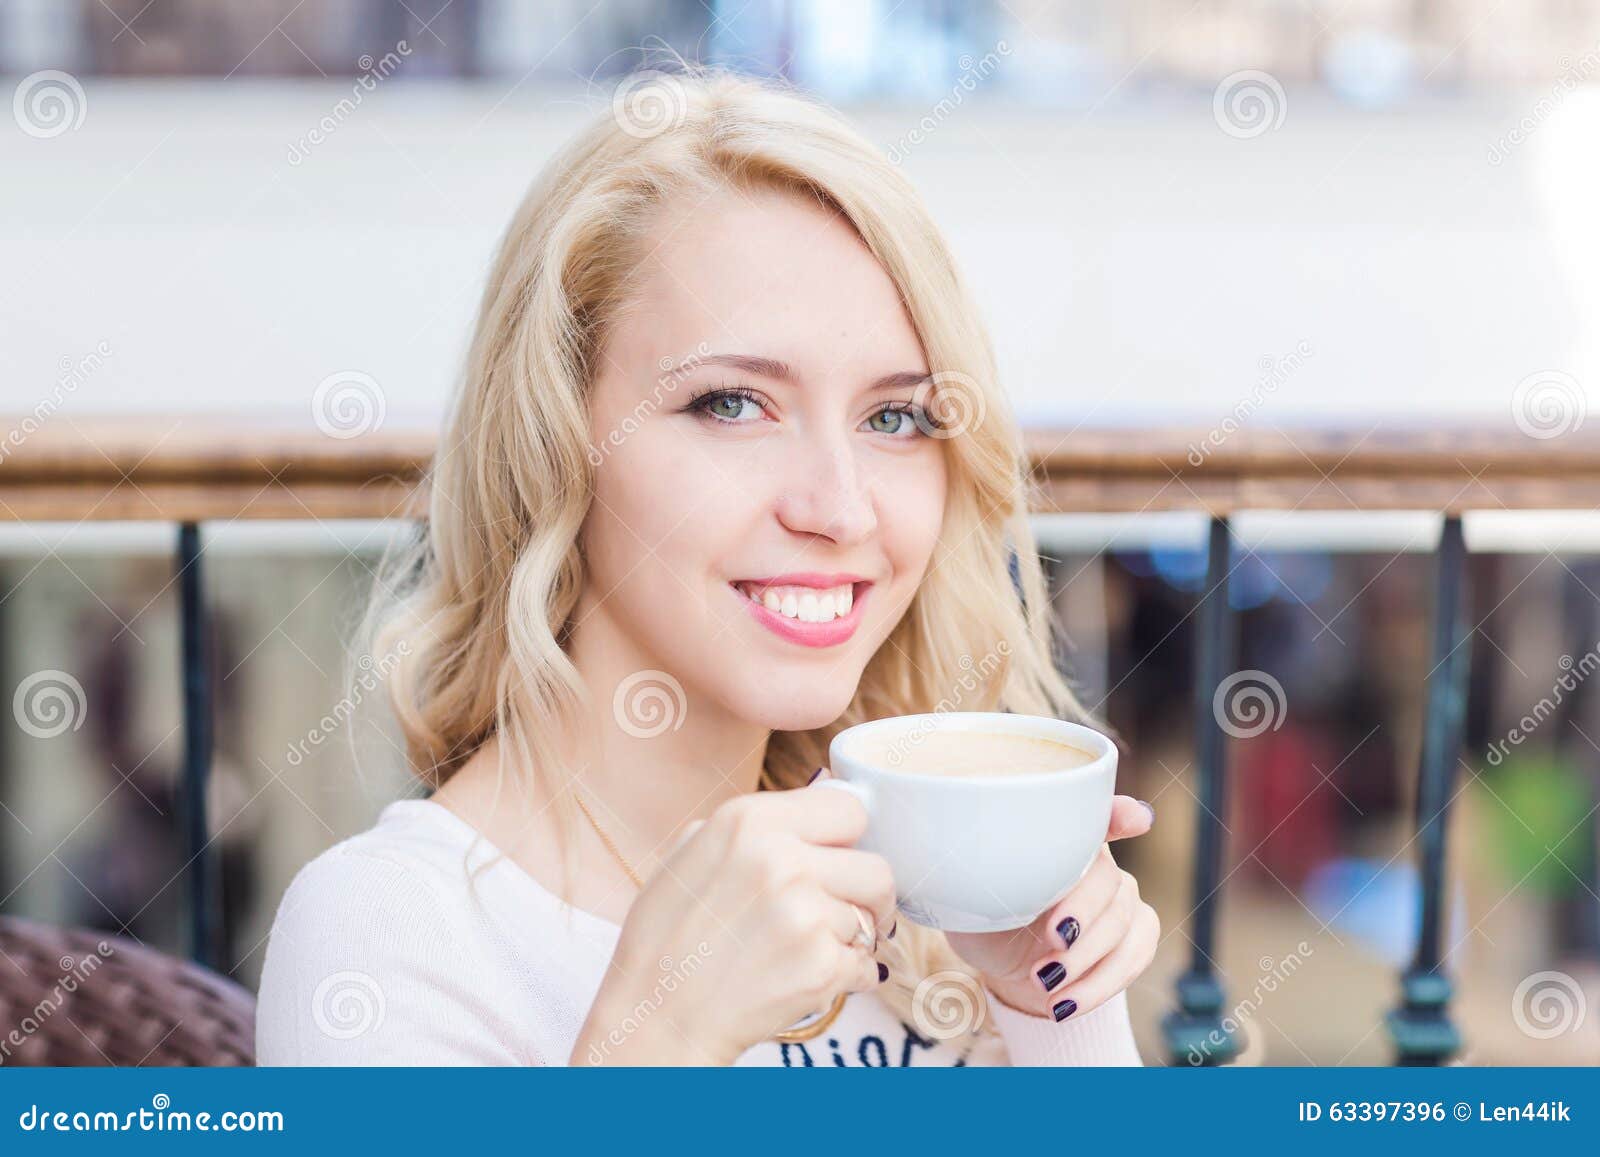 Beautiful Young Girl Drinking Coffe in a Restaurant. Stock Photo ...